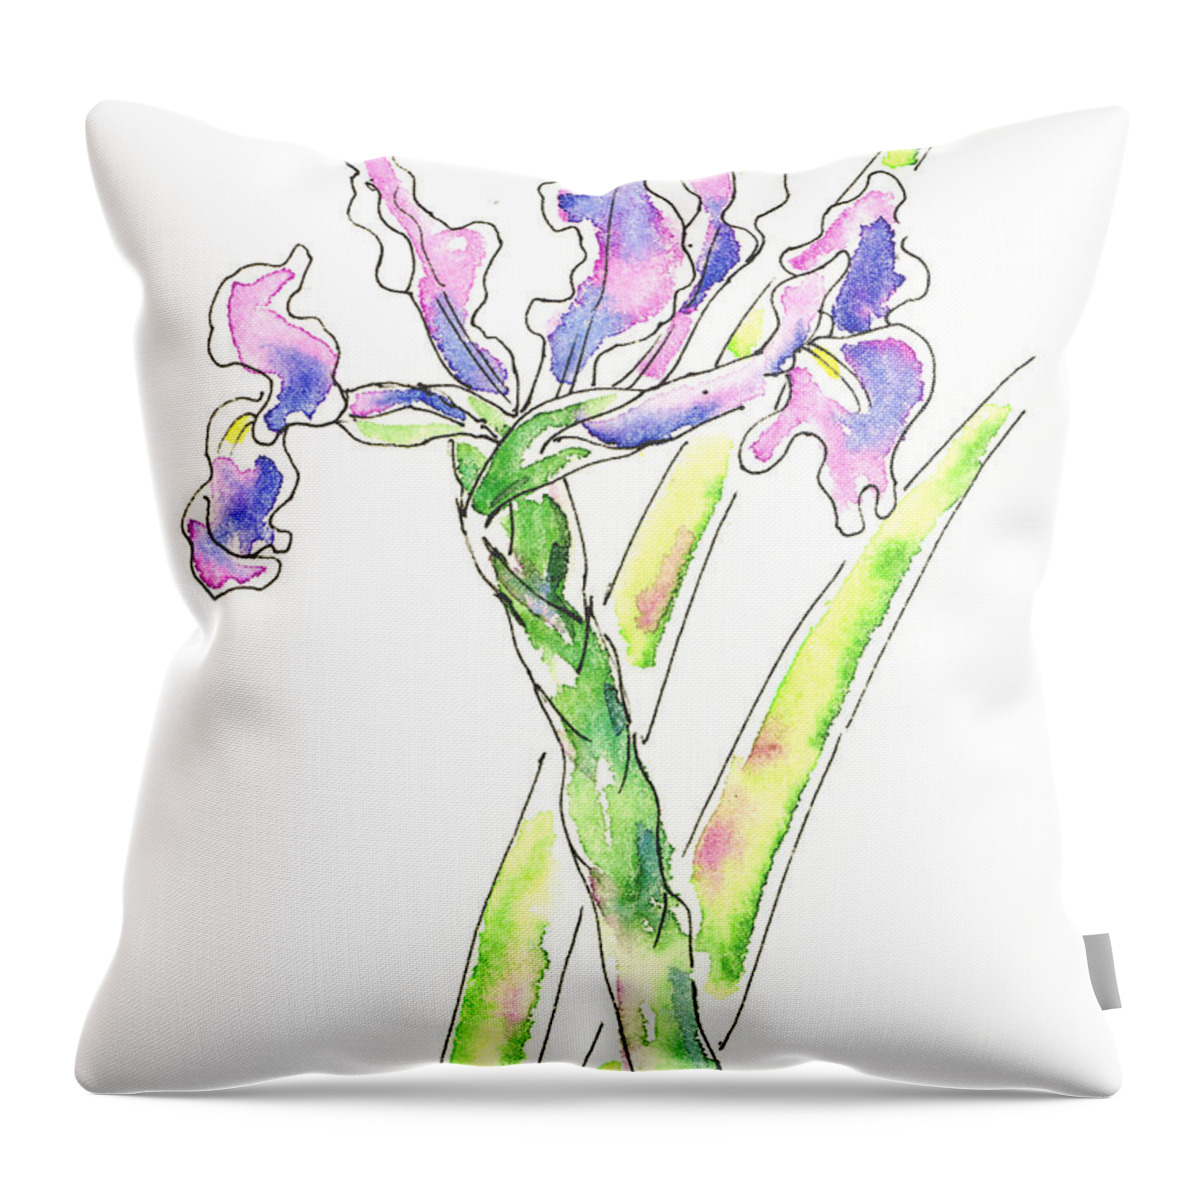 Iris Throw Pillow featuring the painting Iris Watercolor Painting 1 by Gordon Punt